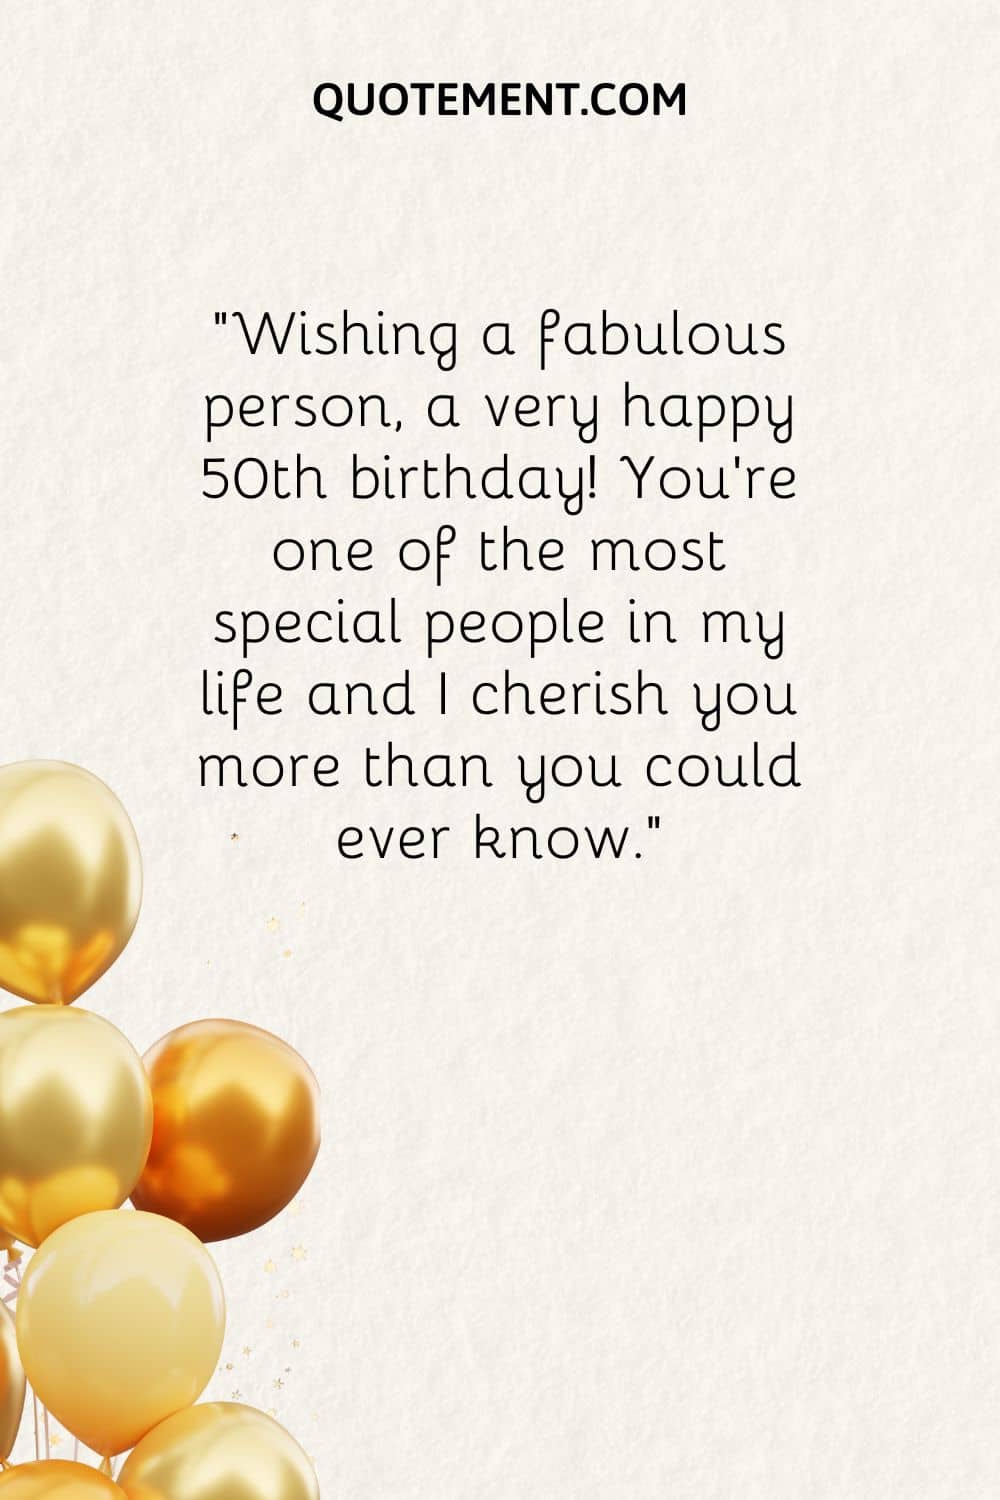 Wishing a fabulous person, a very happy 50th birthday